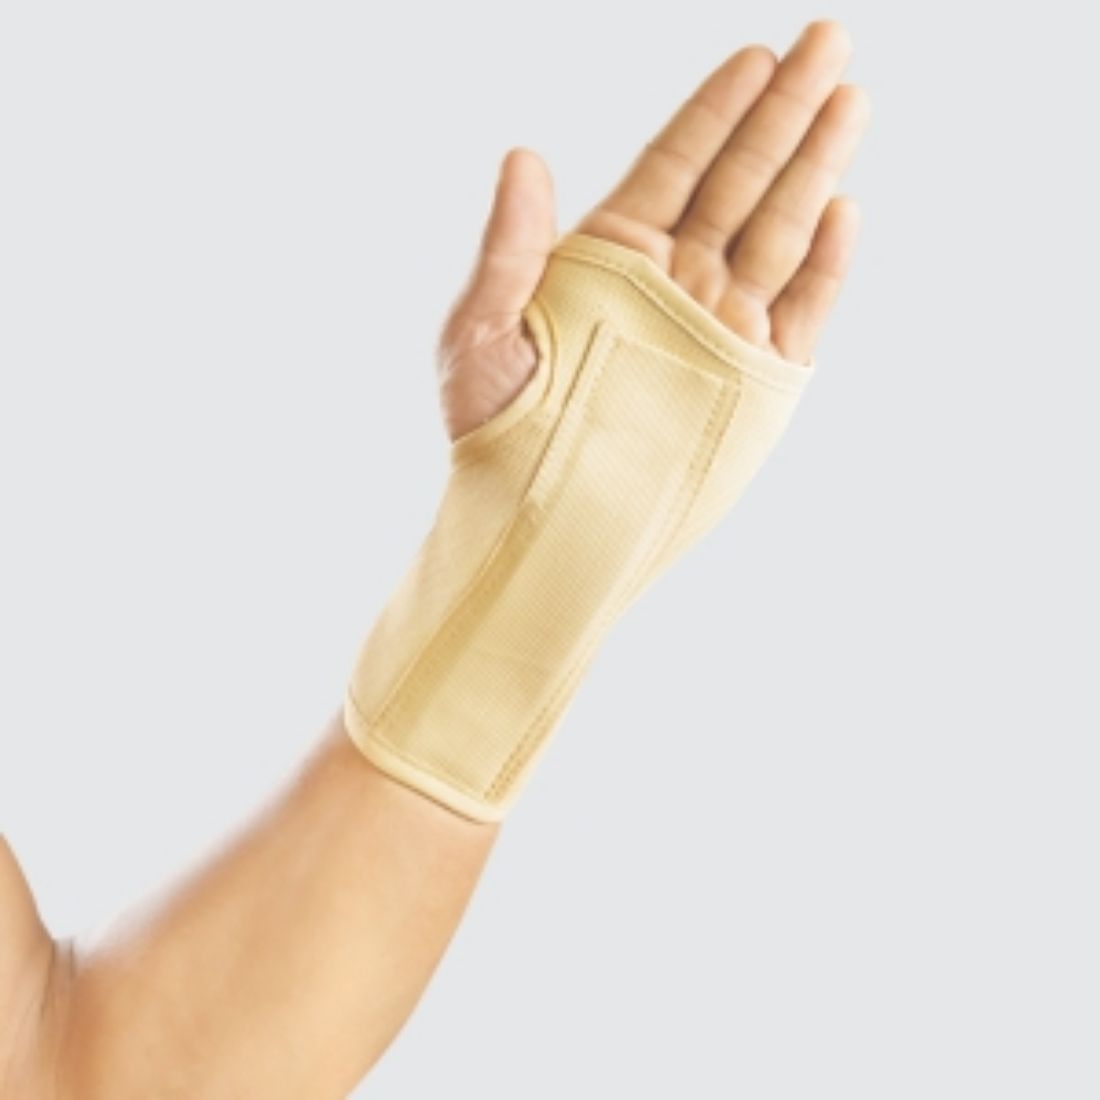 Splint Brace which can be used as a post-traumatic rehabilitation aid to get the injured wrist back in shape. Buy it now for best price in India 